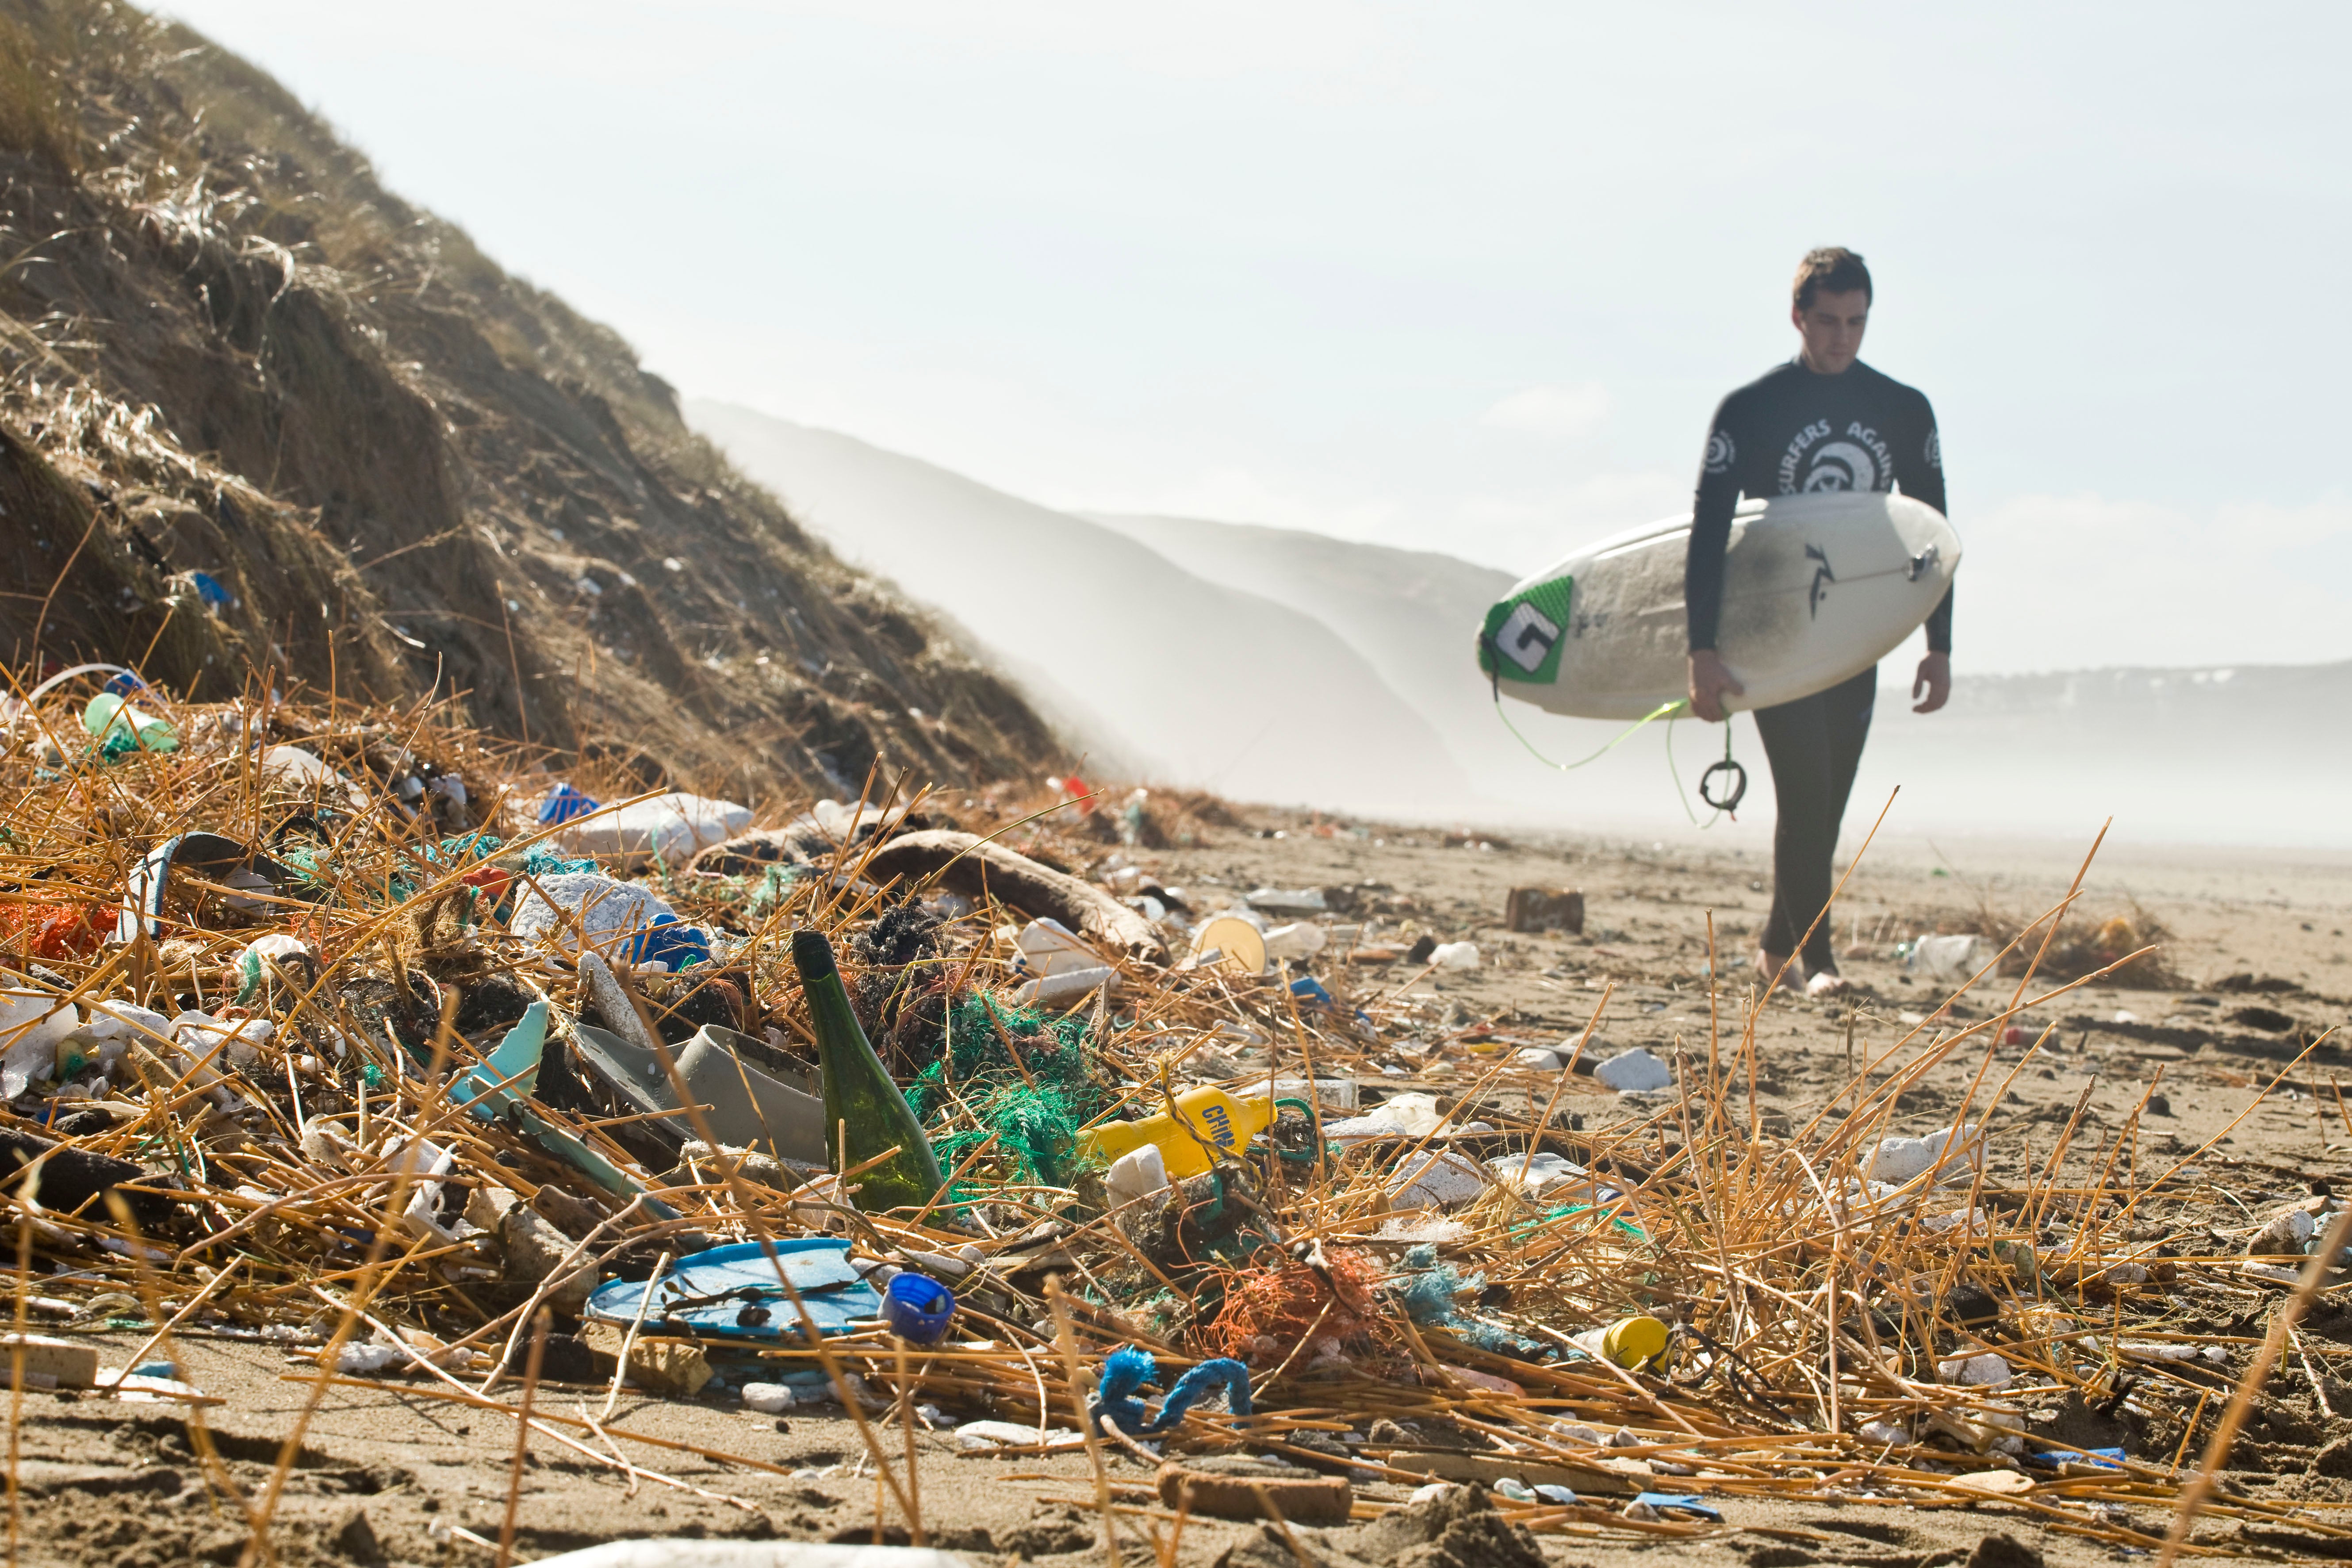 Each year billions of kilograms of rubbish enter our oceans and around 80 per cent of the plastic and trash that ends up in our seas comes from sources on land